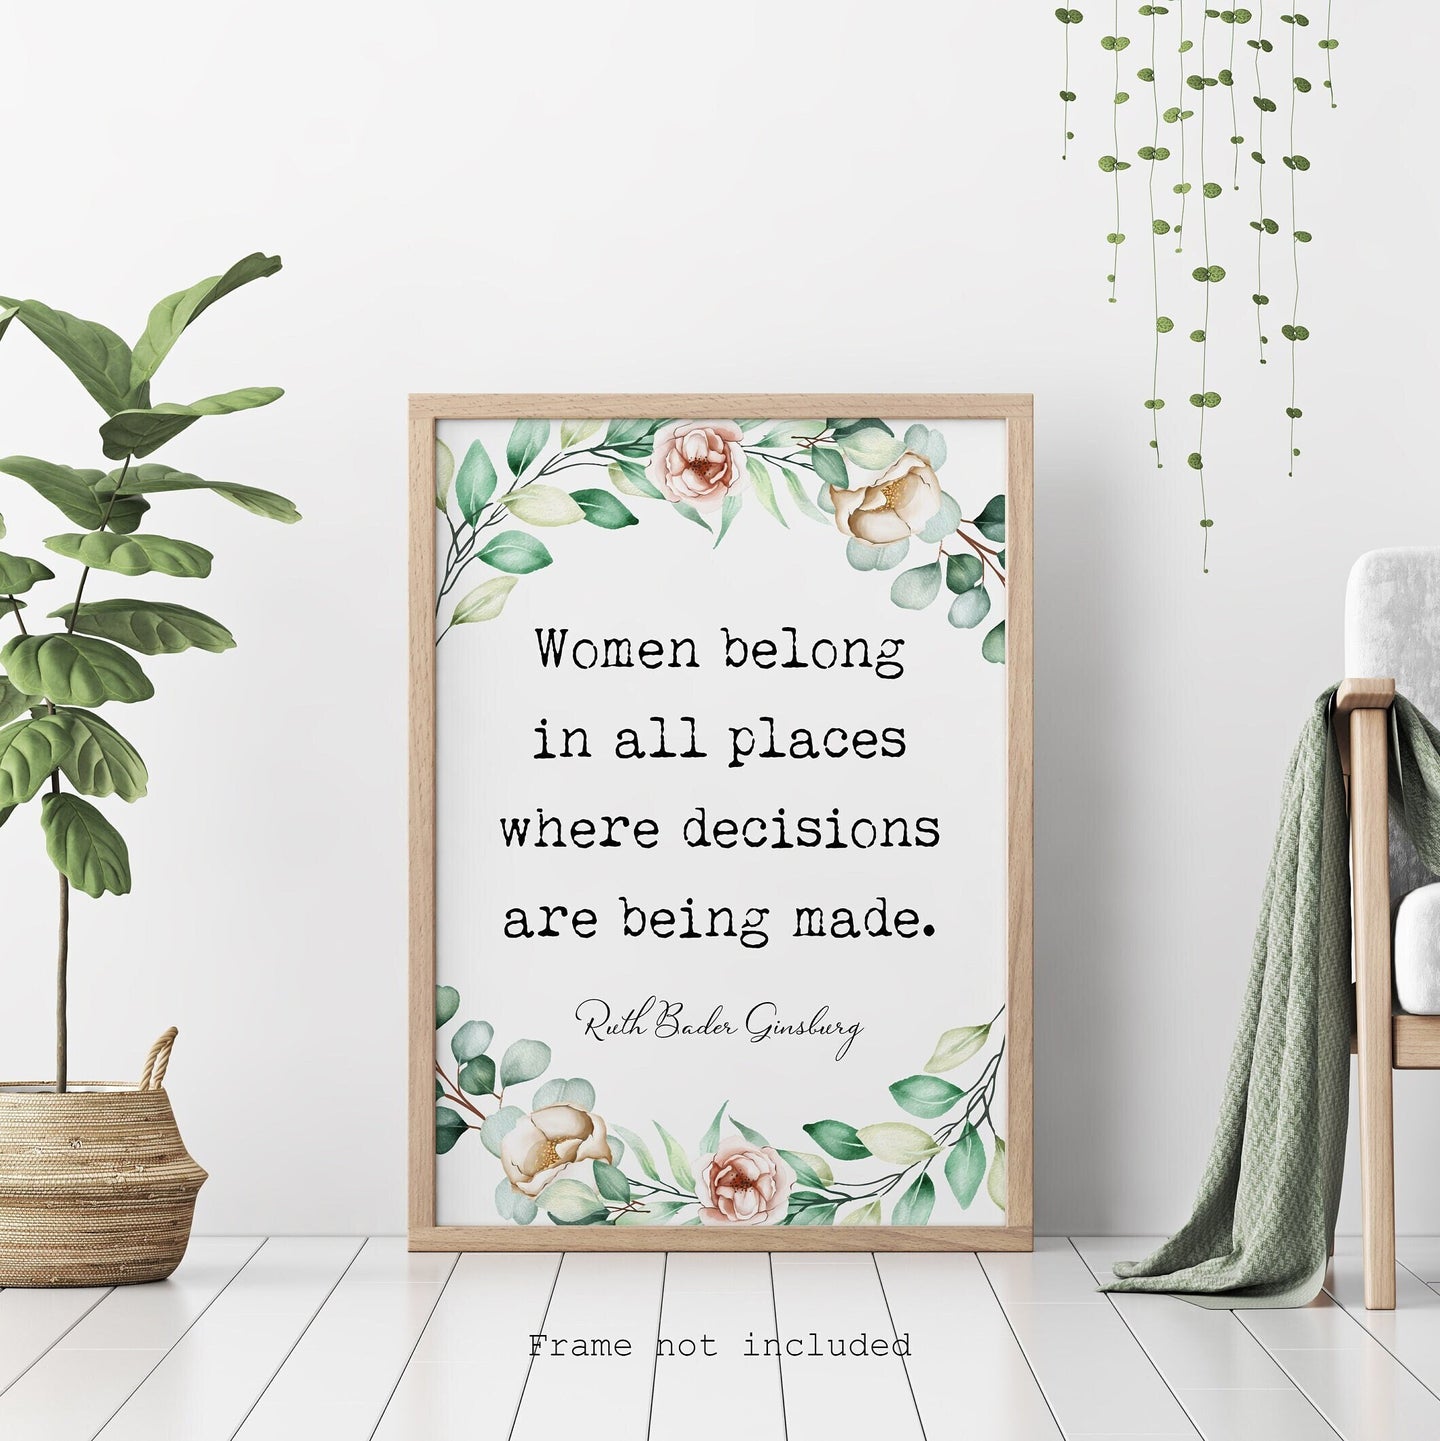 Ruth Bader Ginsburg Quote - Women belong in all places decisions are being made - UNFRAMED Print